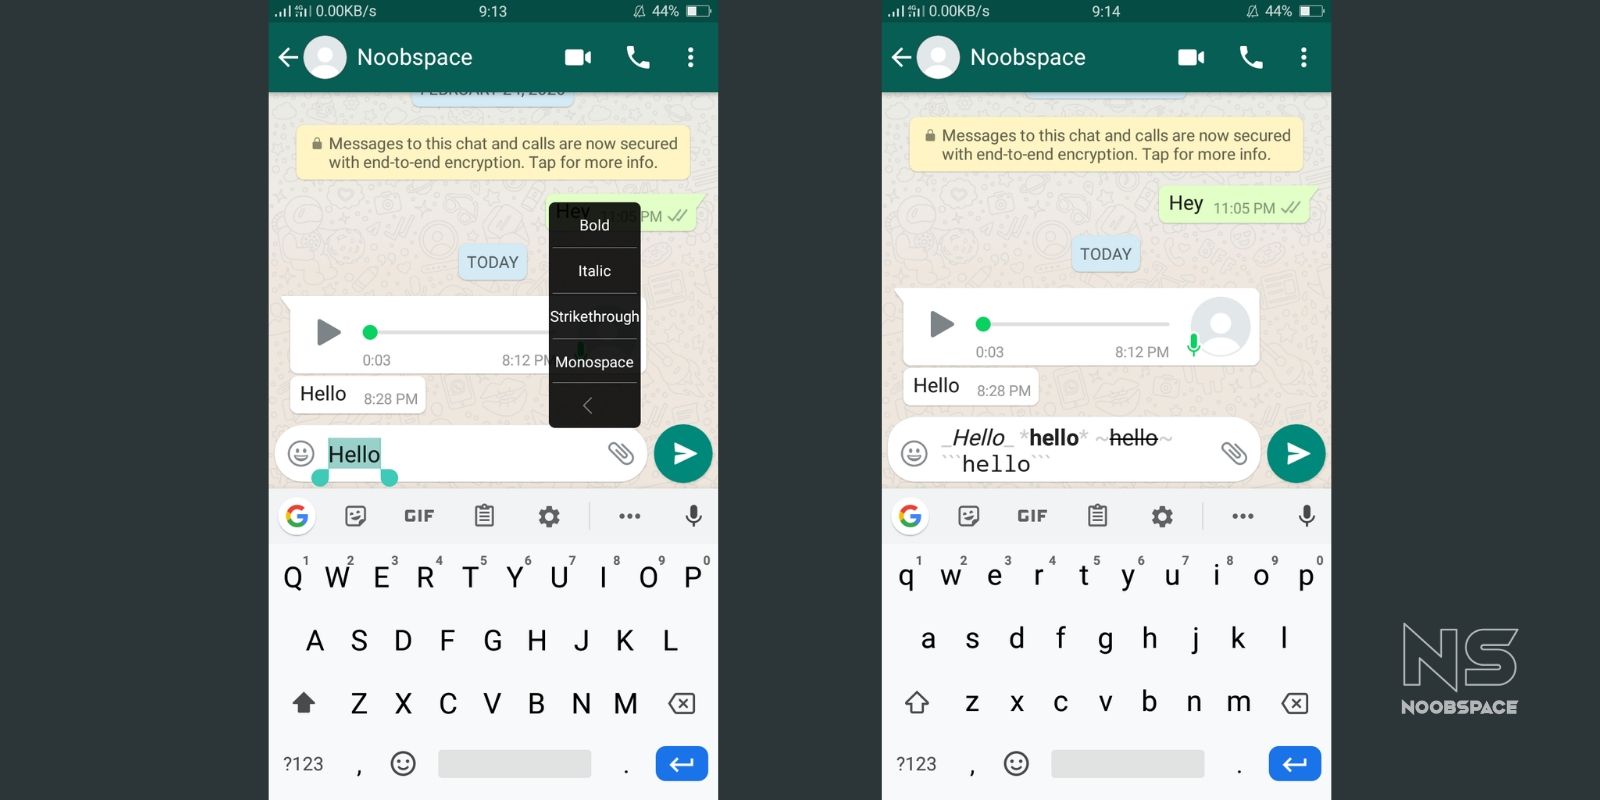 Use different styles and fonts in WhatsApp chatting